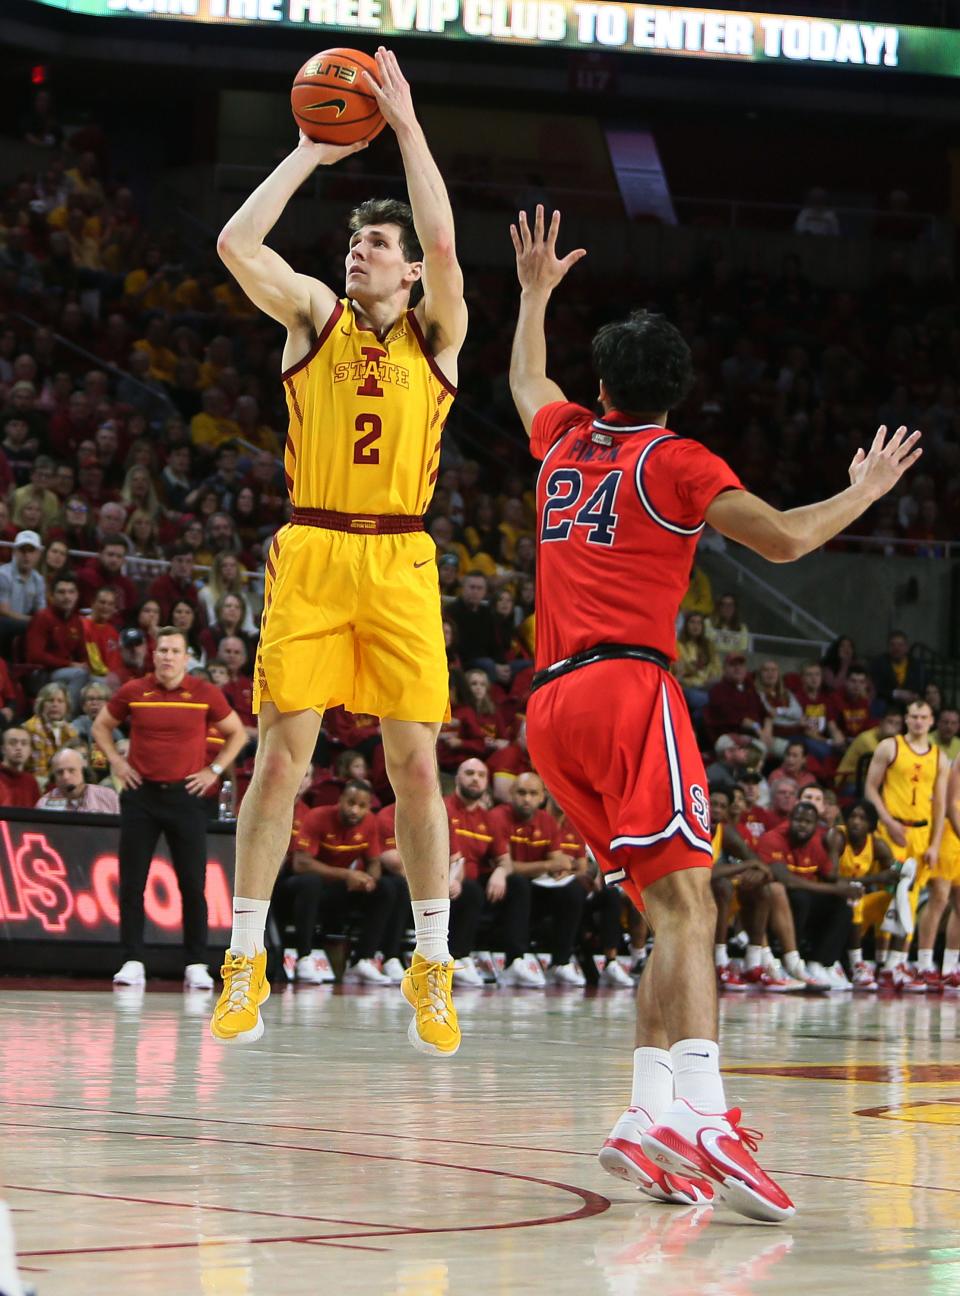 No. 23 Iowa State's Caleb Grill makes a three-point basket against St. John's Sunday.